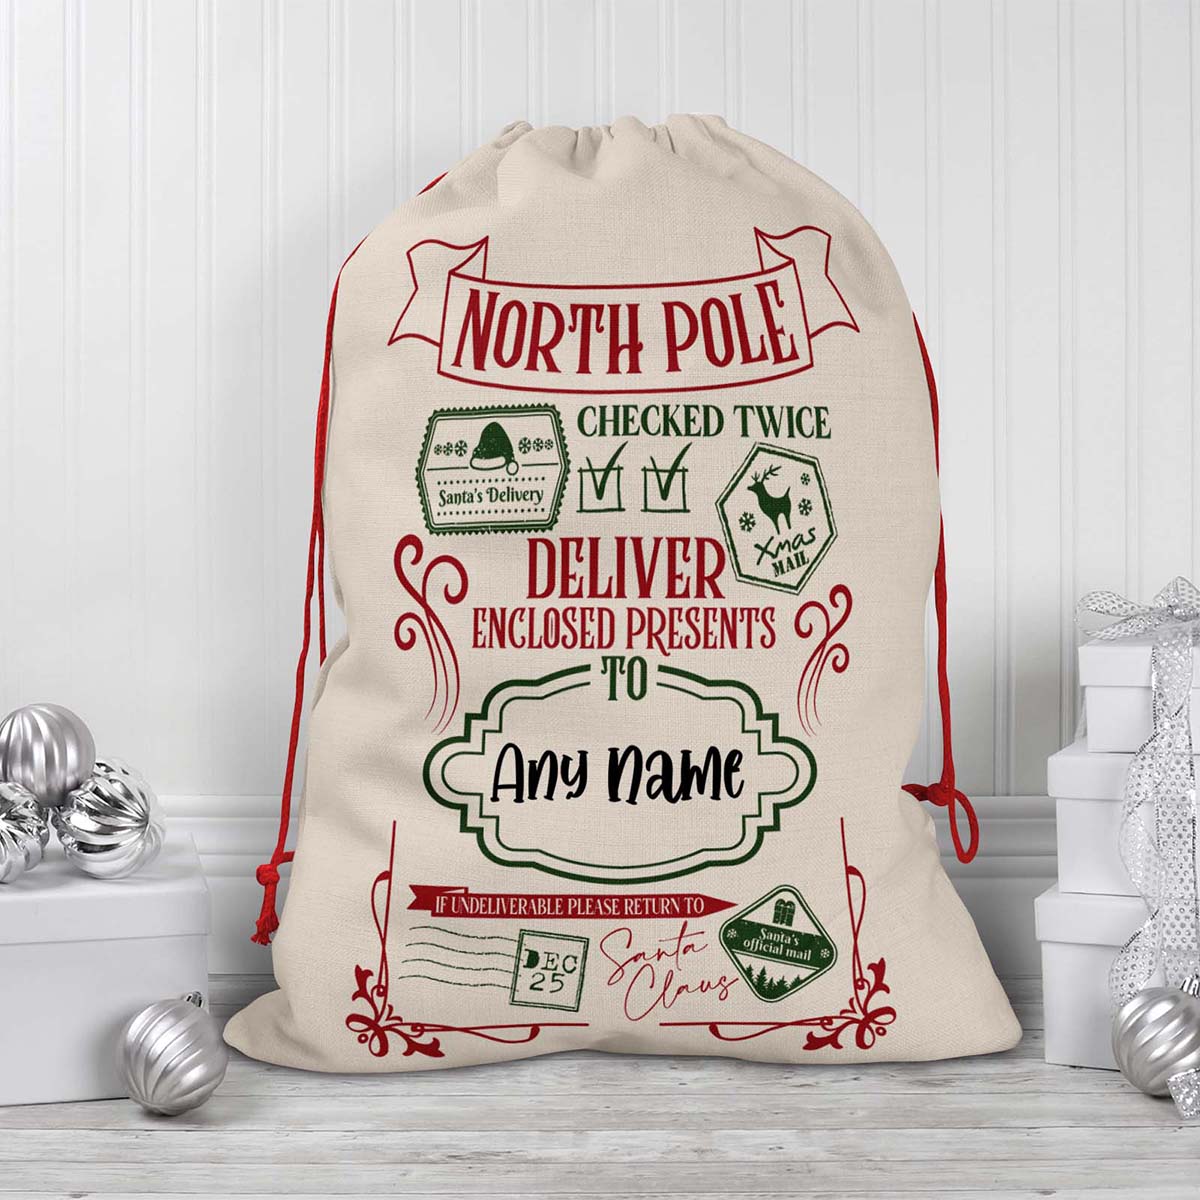 North Pole Deliver Enclosed Presents Personalized Christmas Gift Delivery SackCustomly Gifts